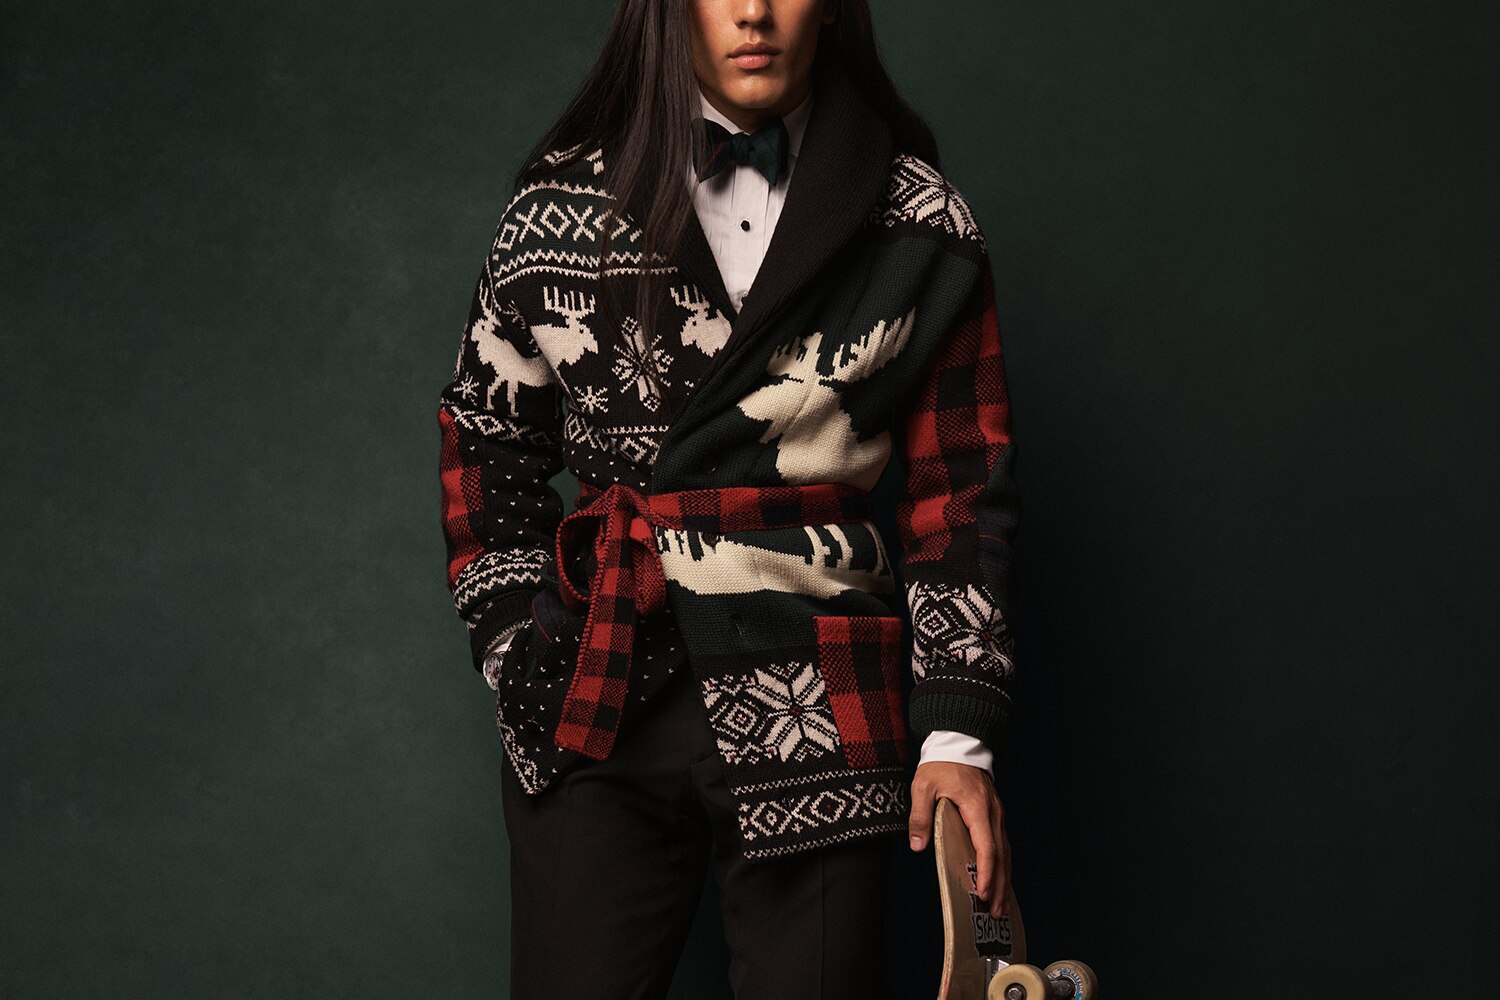 Partnership: Ralph Lauren's New Holiday Collection | The Journal | MR PORTER